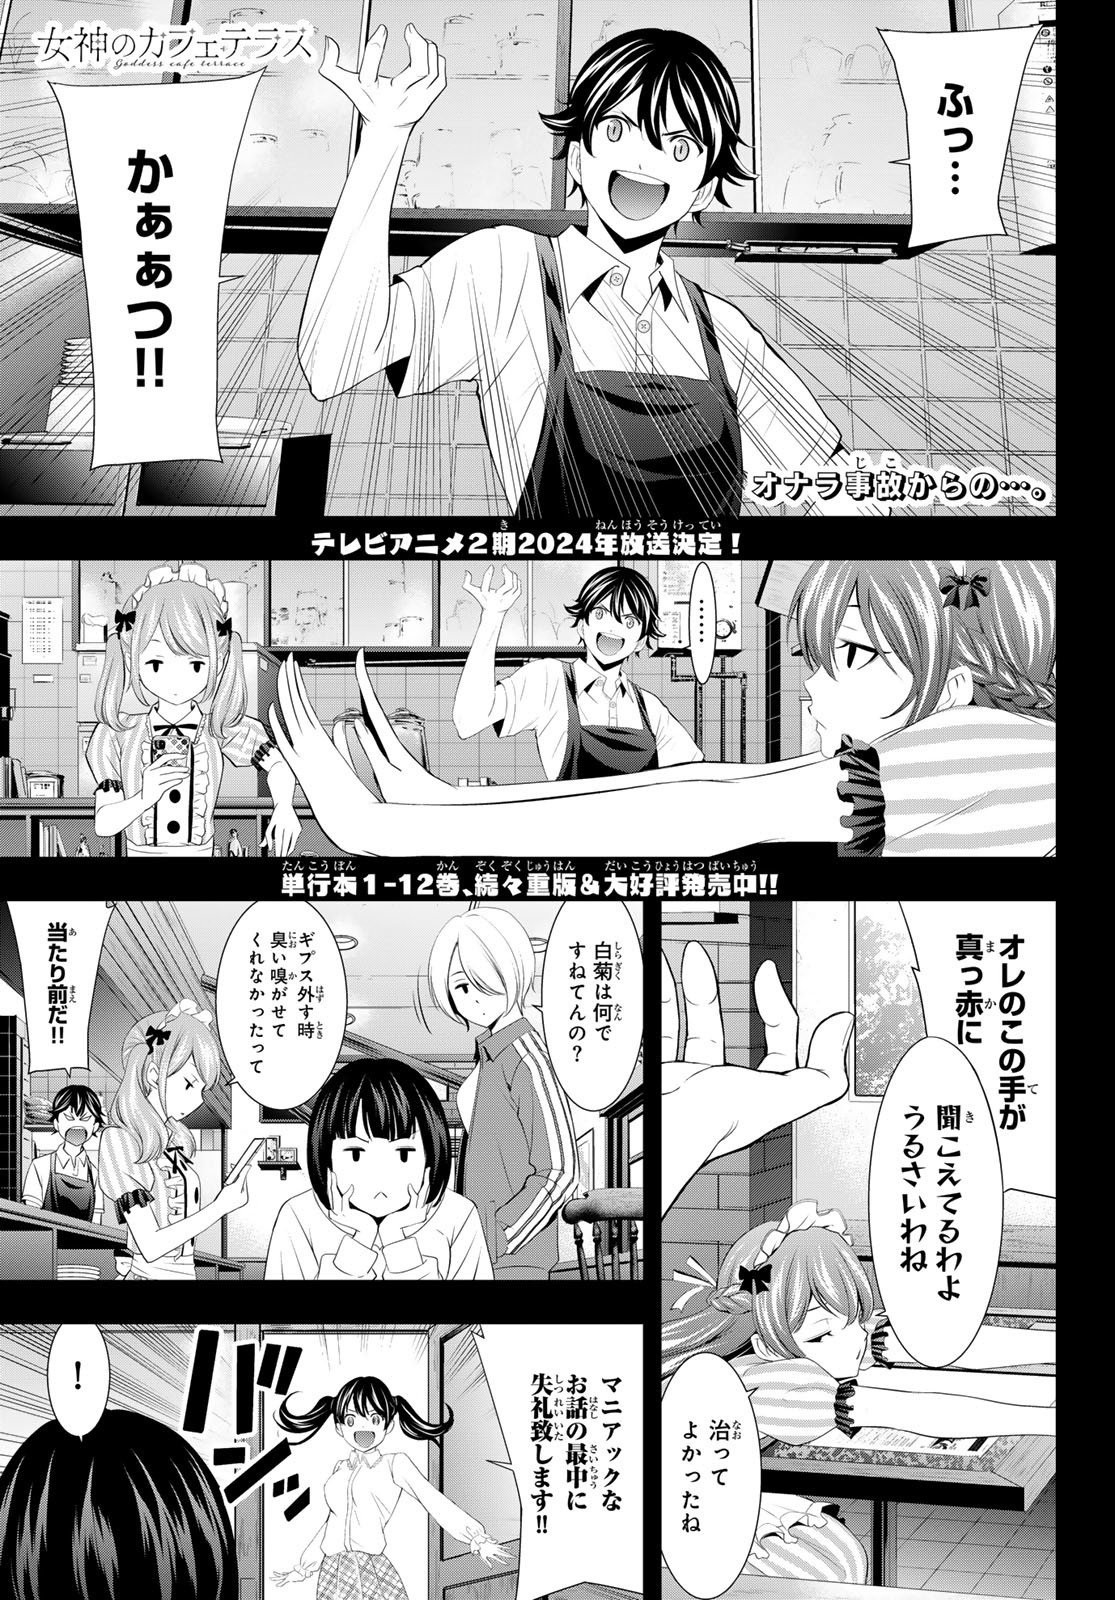 Megami no Cafe Terace - Chapter 129 - Page 1